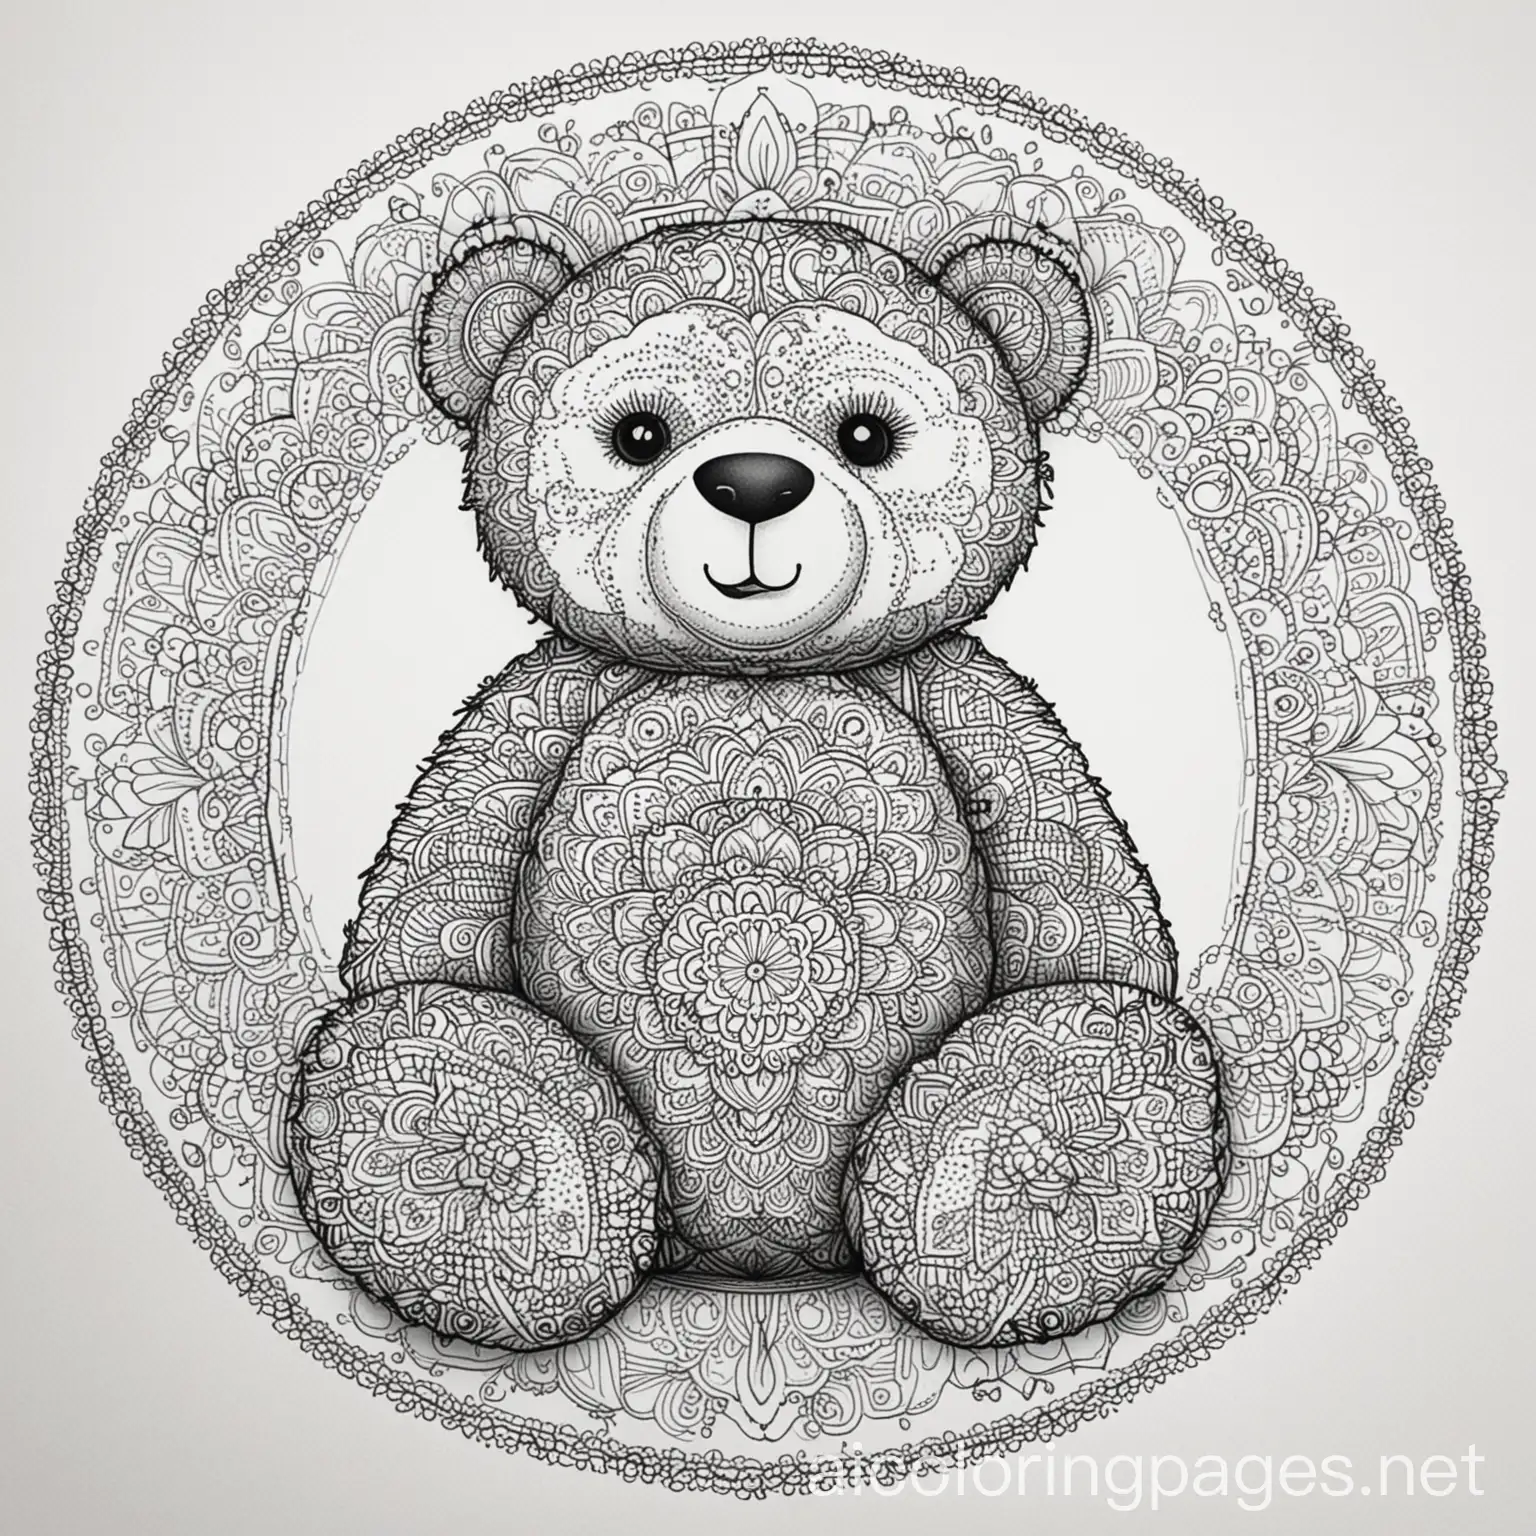 a colorful mandala Teddy Bear Picture, Coloring Page, black and white, line art, white background, Simplicity, Ample White Space. The background of the coloring page is plain white to make it easy for young children to color within the lines. The outlines of all the subjects are easy to distinguish, making it simple for kids to color without too much difficulty